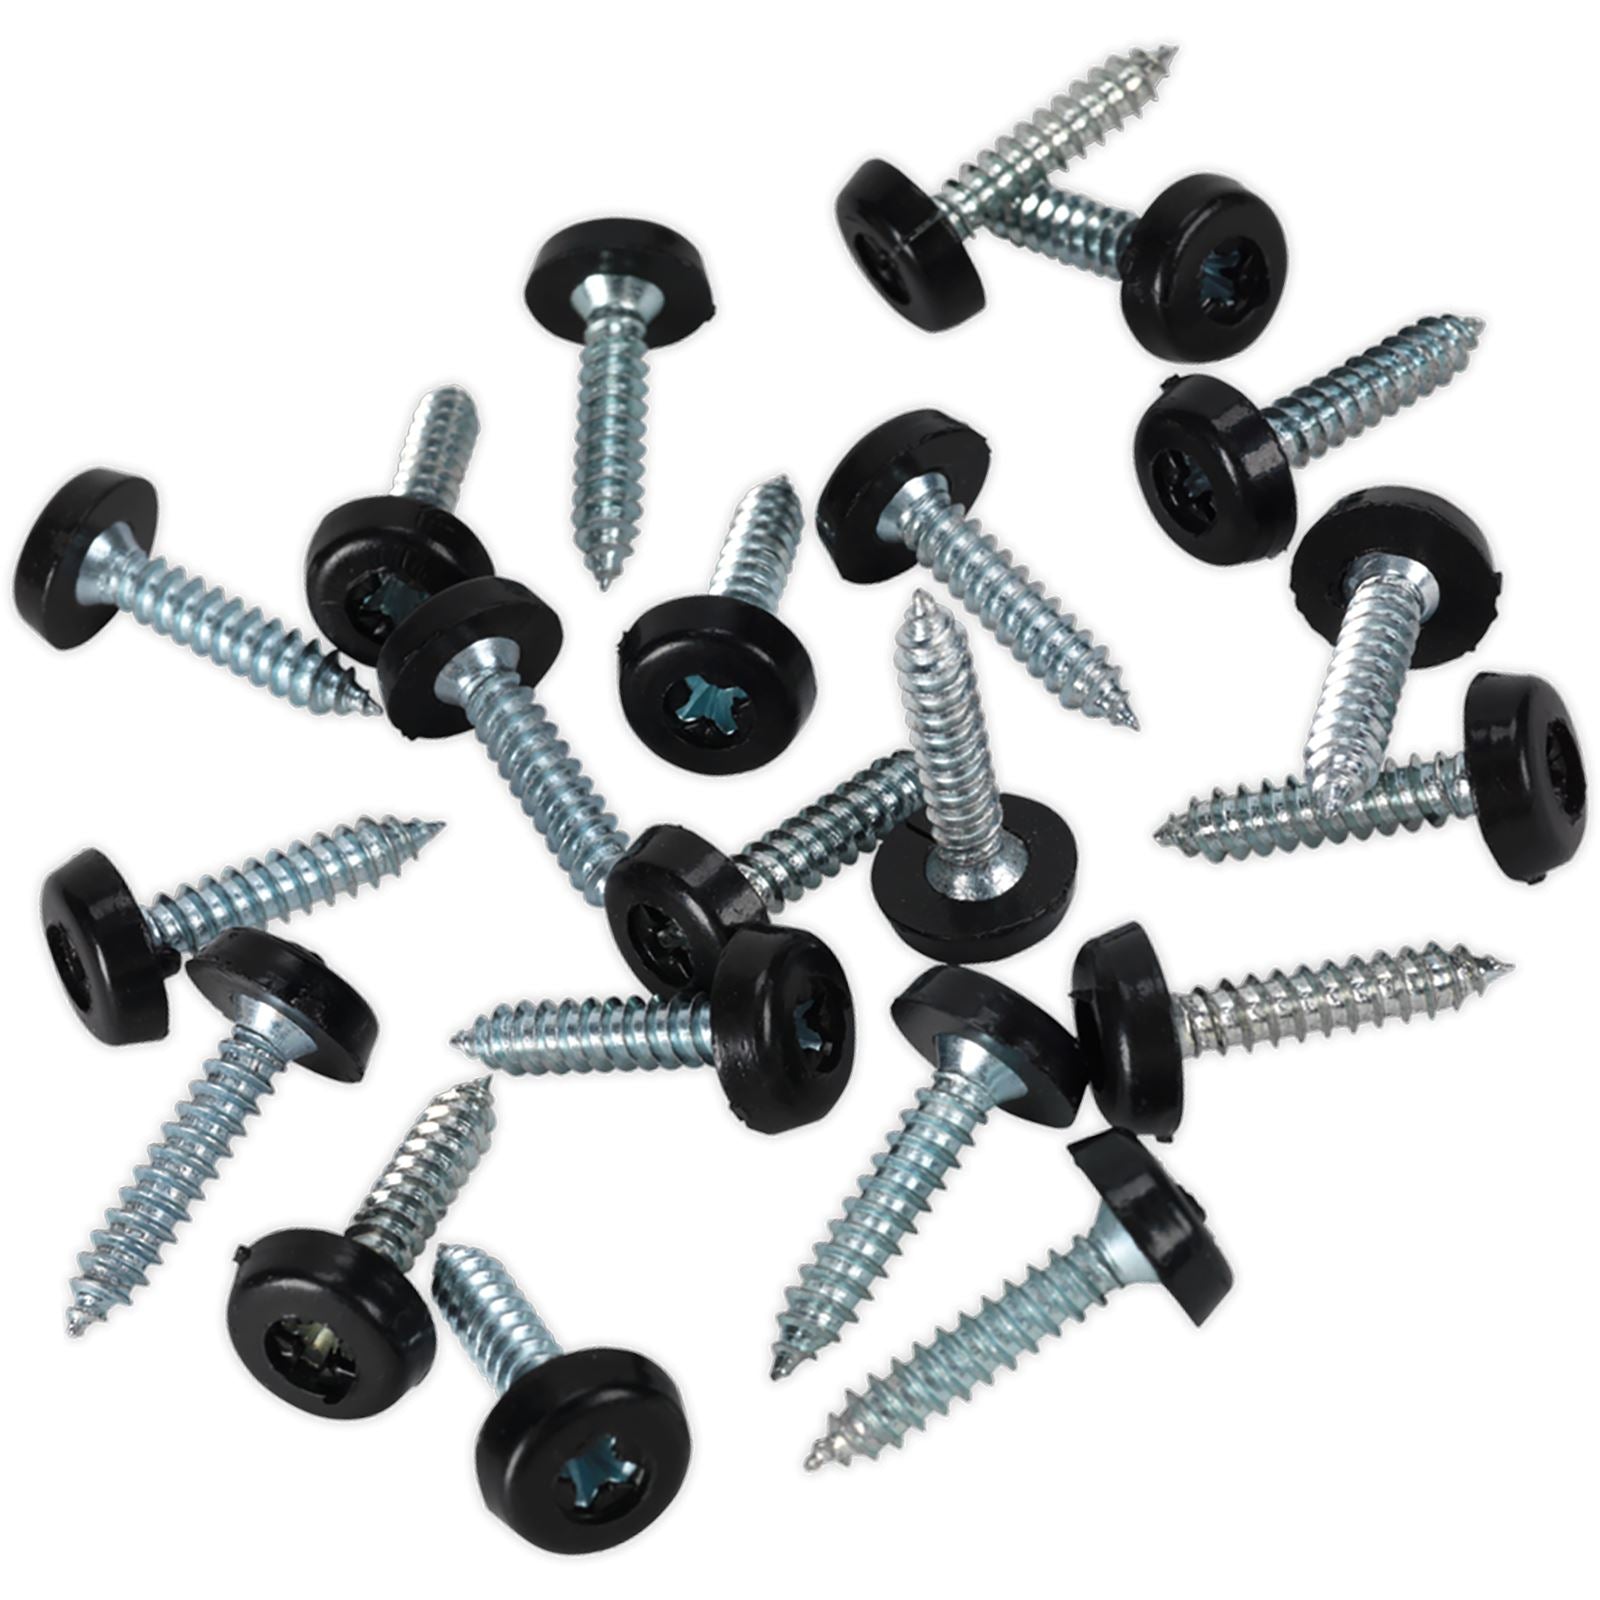 Sealey Black Number Plate Screw Plastic Enclosed Head 4.8 x 24mm - Pack of 50